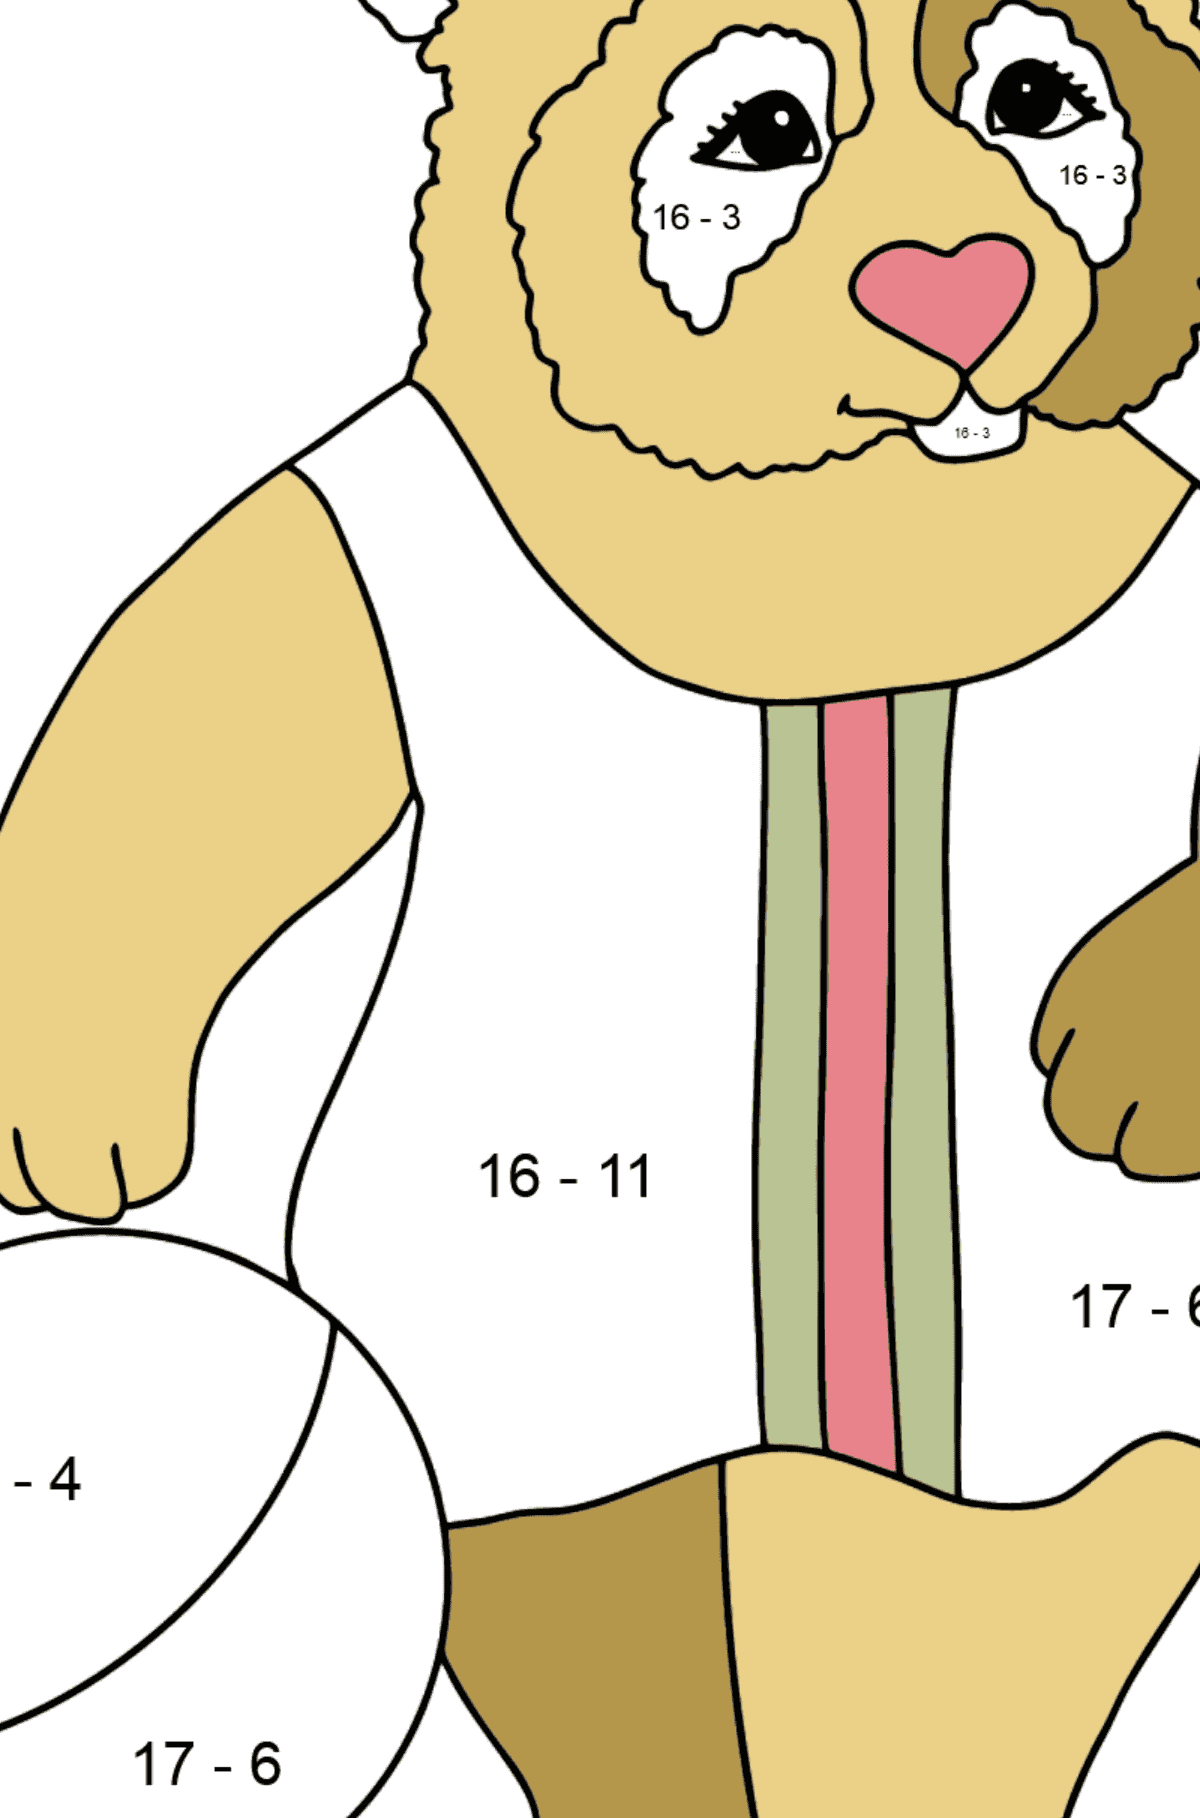 Panda For Babies (Difficult) coloring page - Math Coloring - Subtraction for Kids